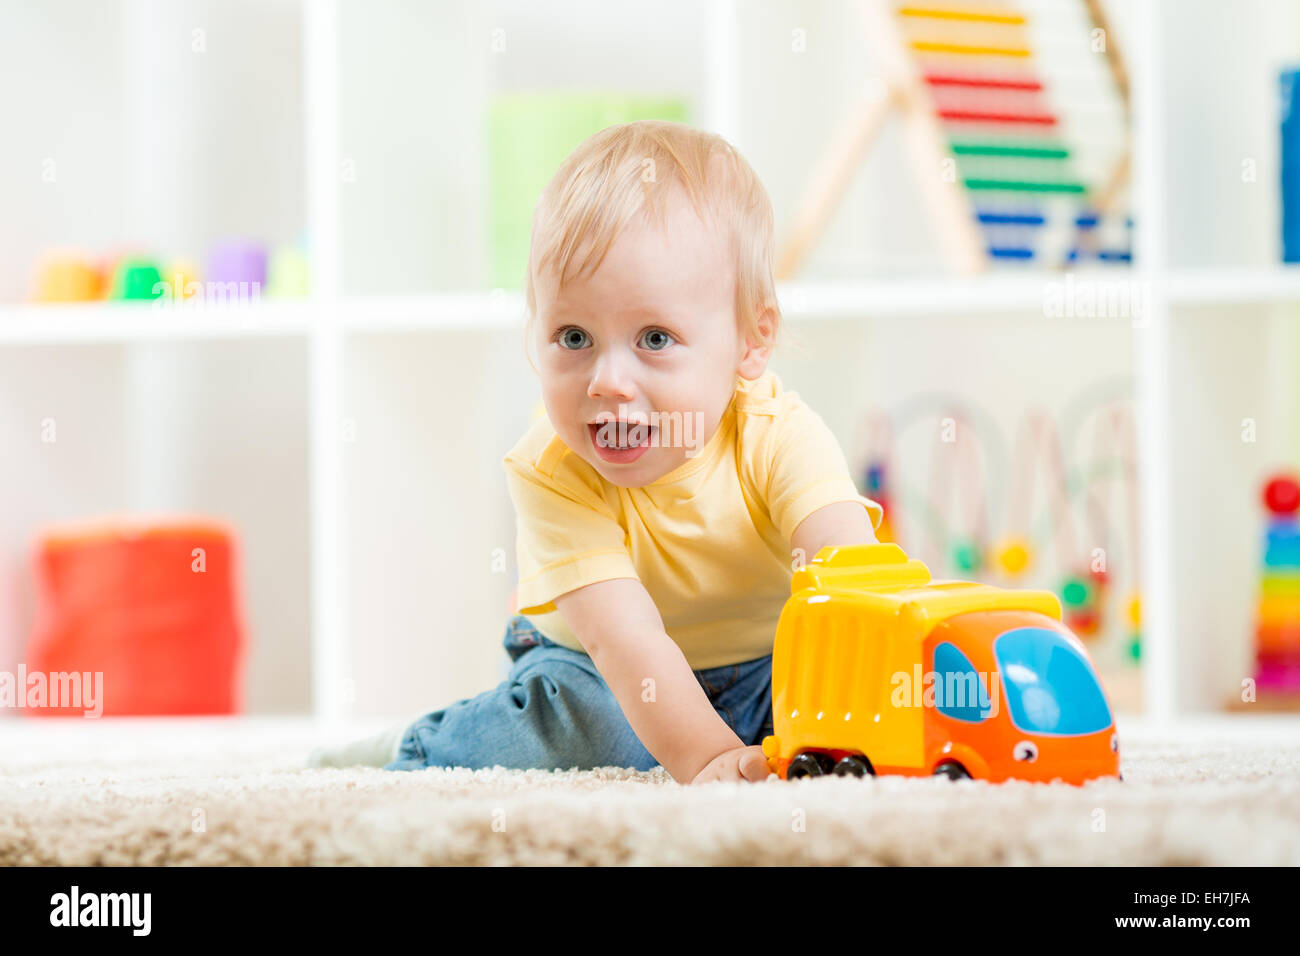 child boy toddler playing with toy car Stock Photo